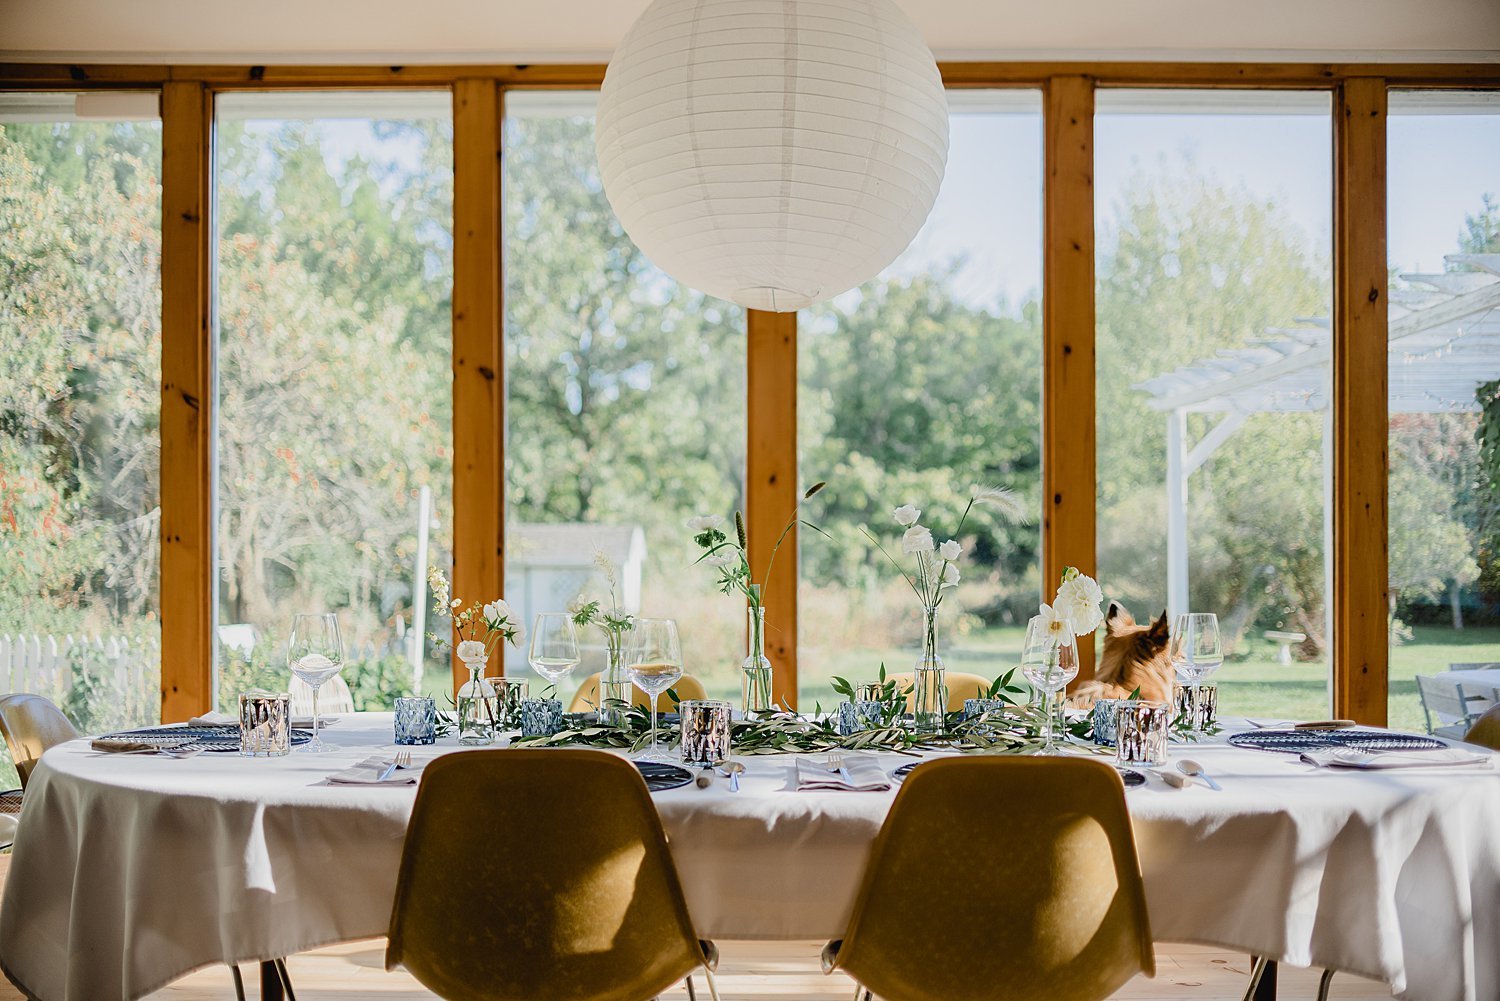 An Intimate Elopement at an Airbnb in Prince Edward County | Prince Edward County Wedding Photographer | Holly McMurter Photographs_0002.jpg